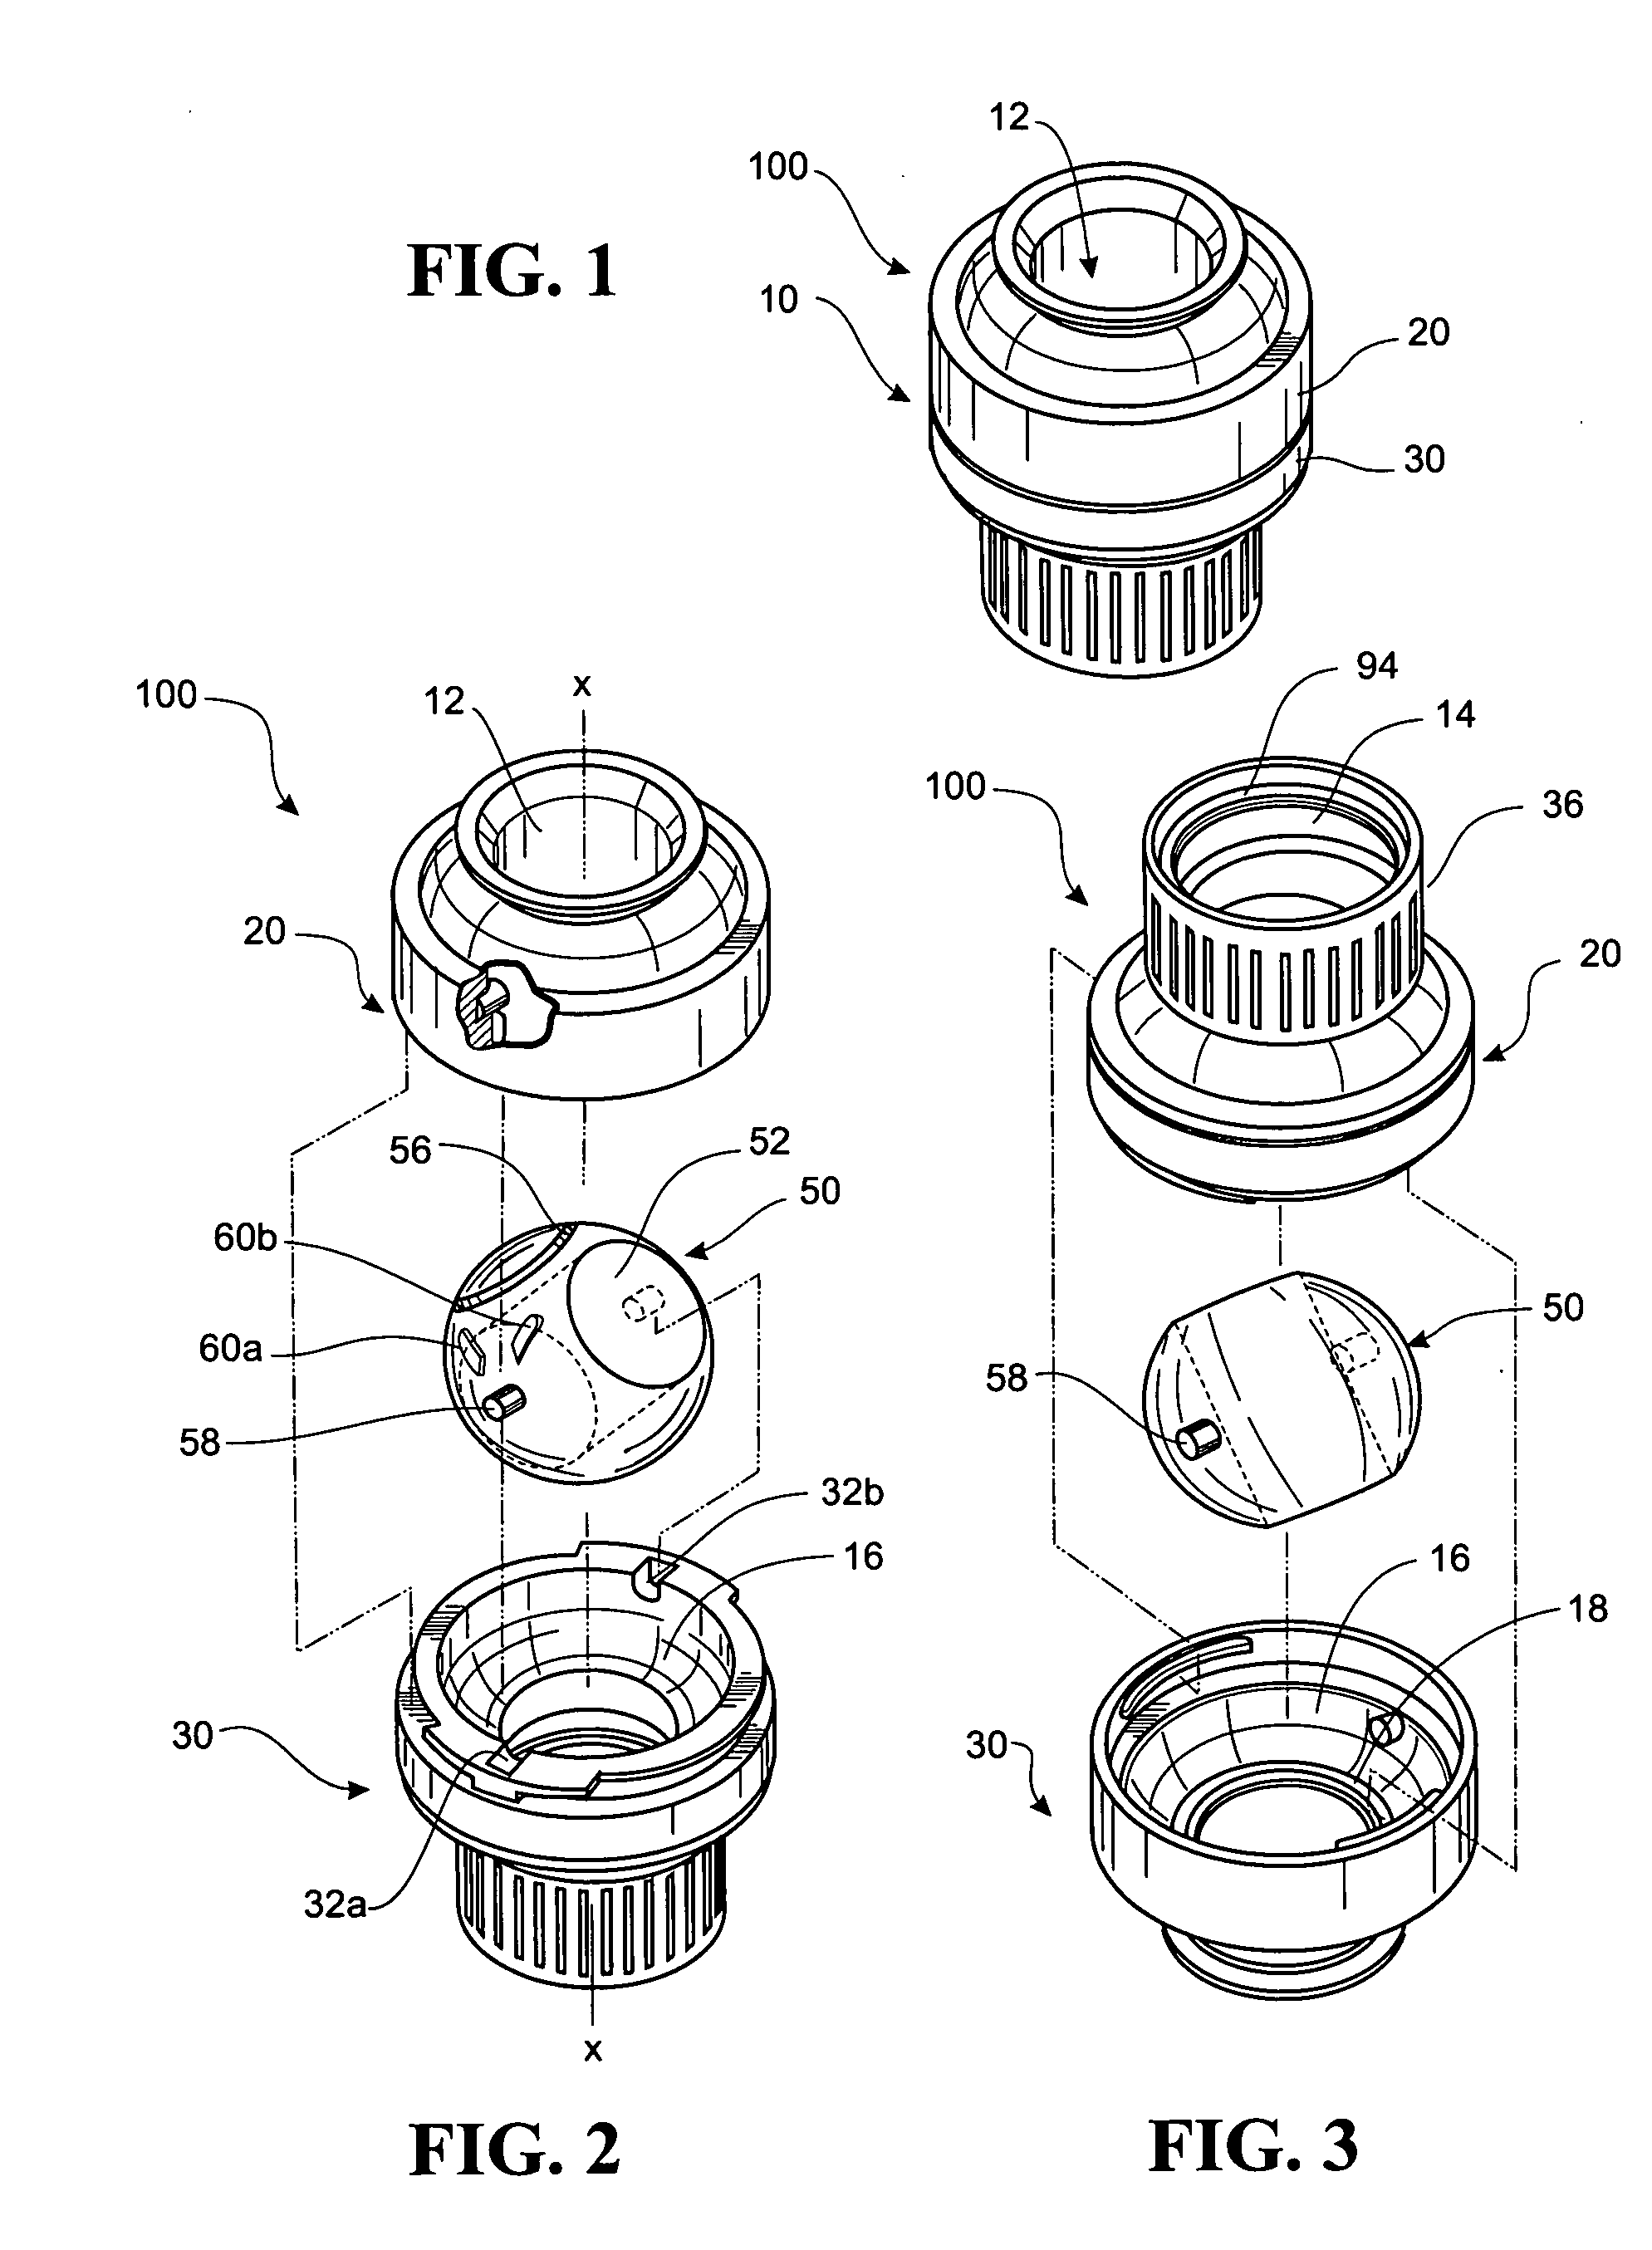 Flow switch and container